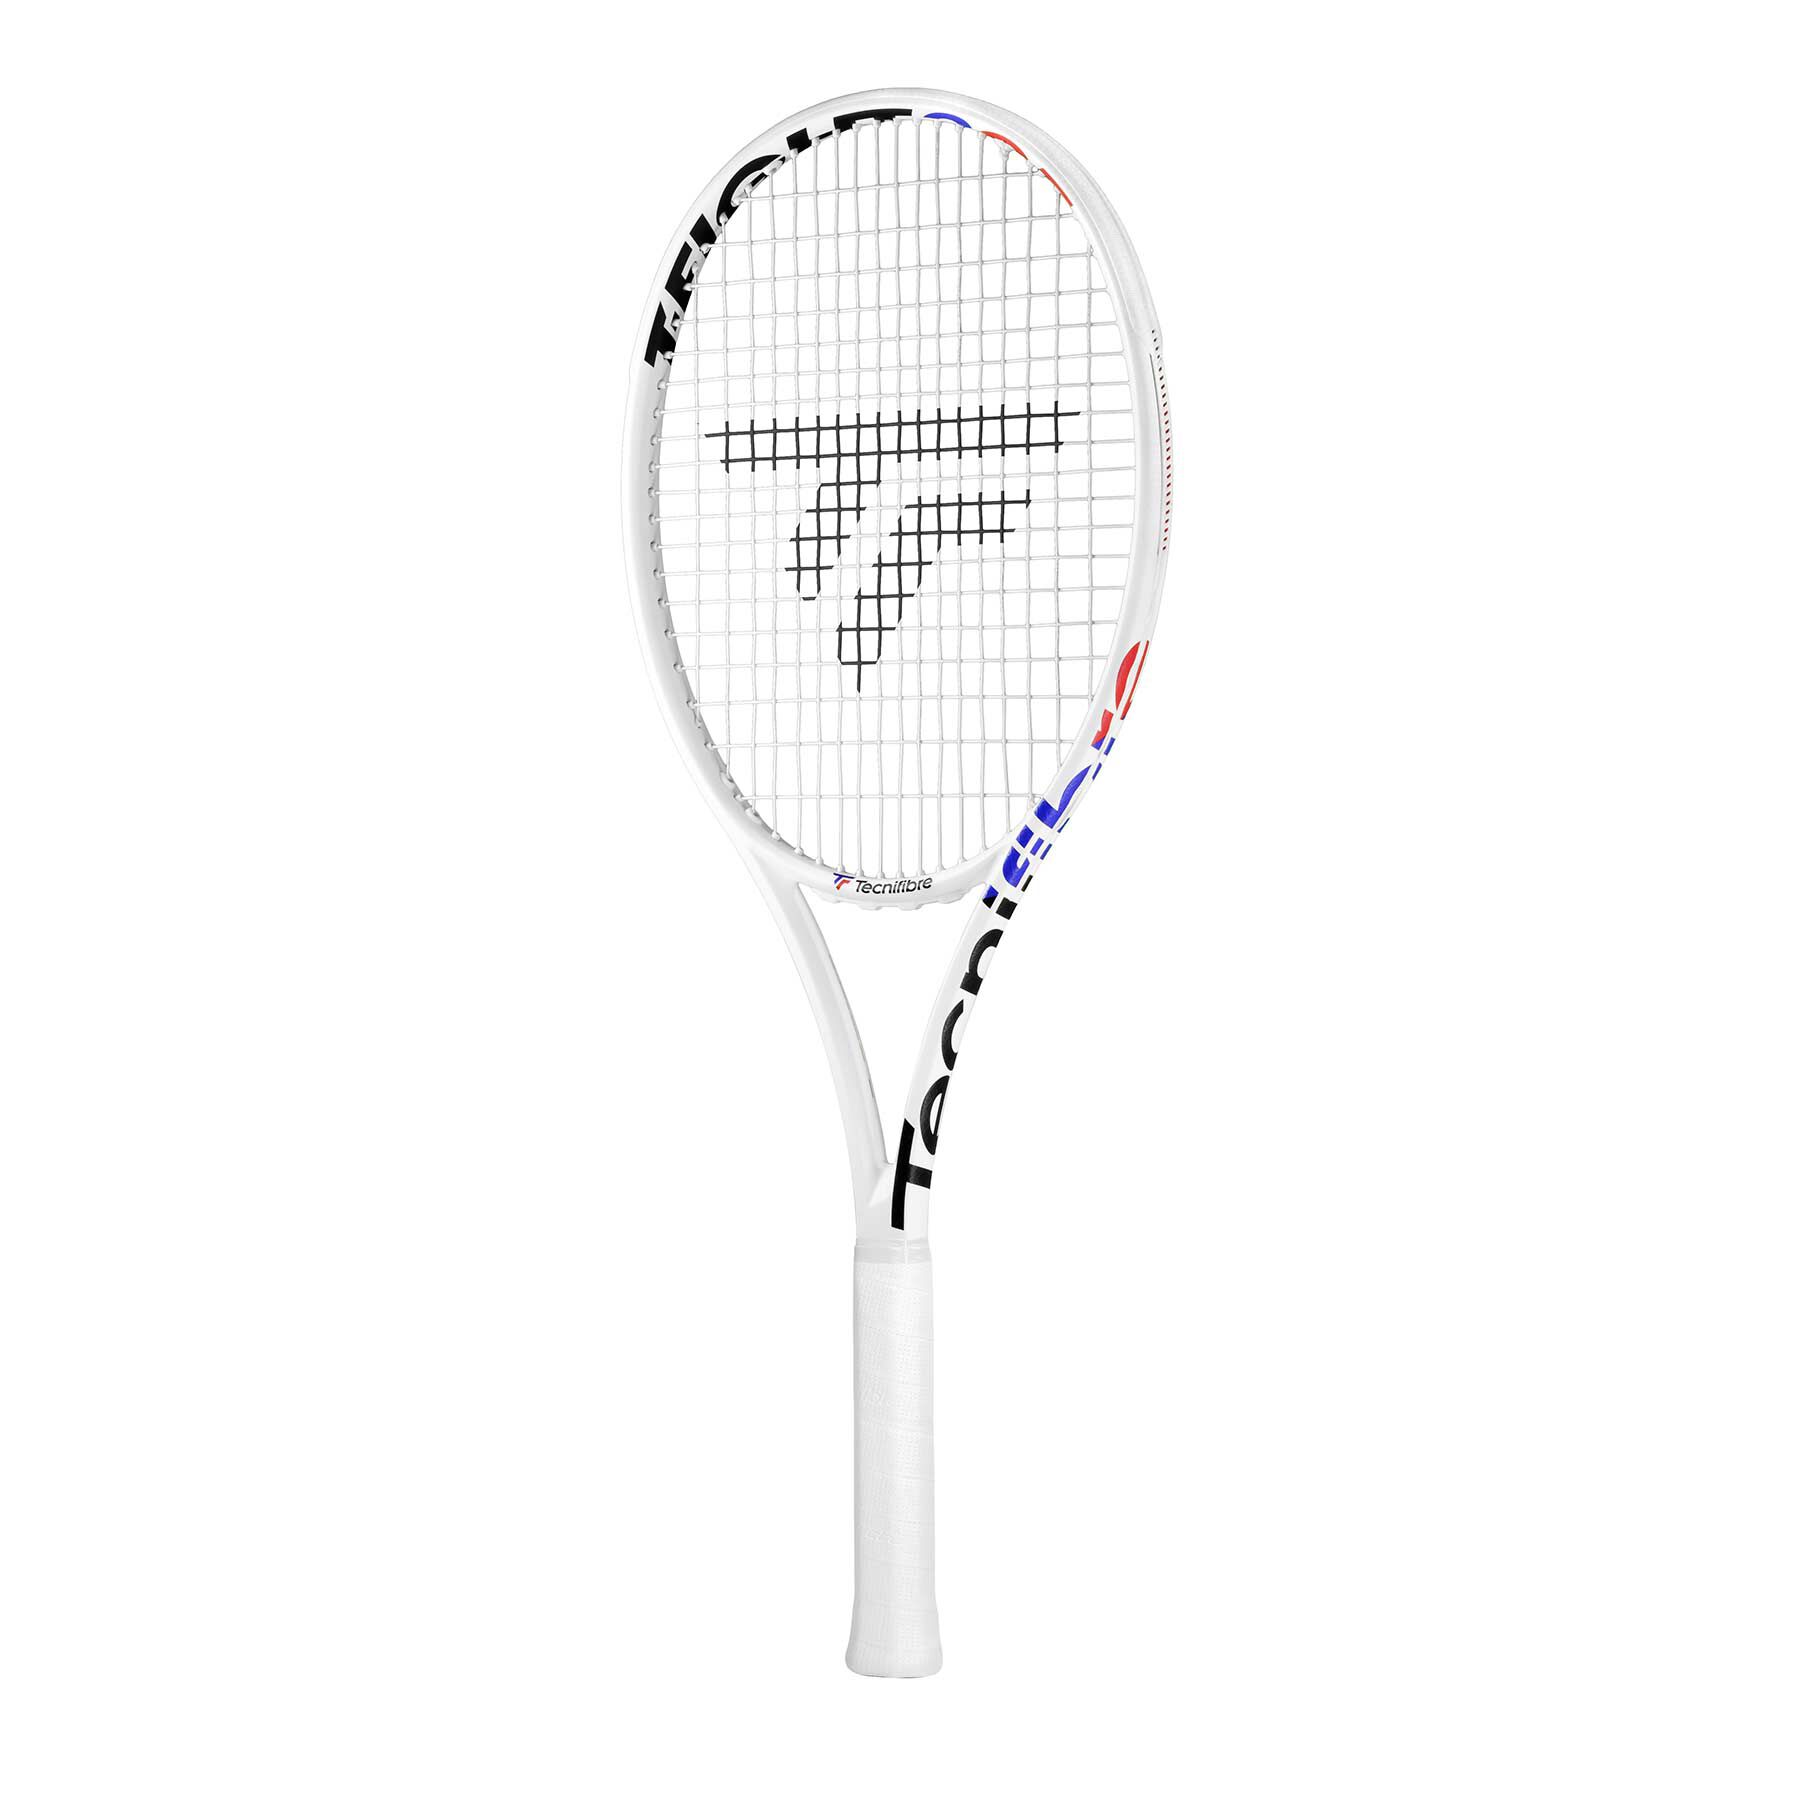 Discover the T-Fight range of tennis rackets